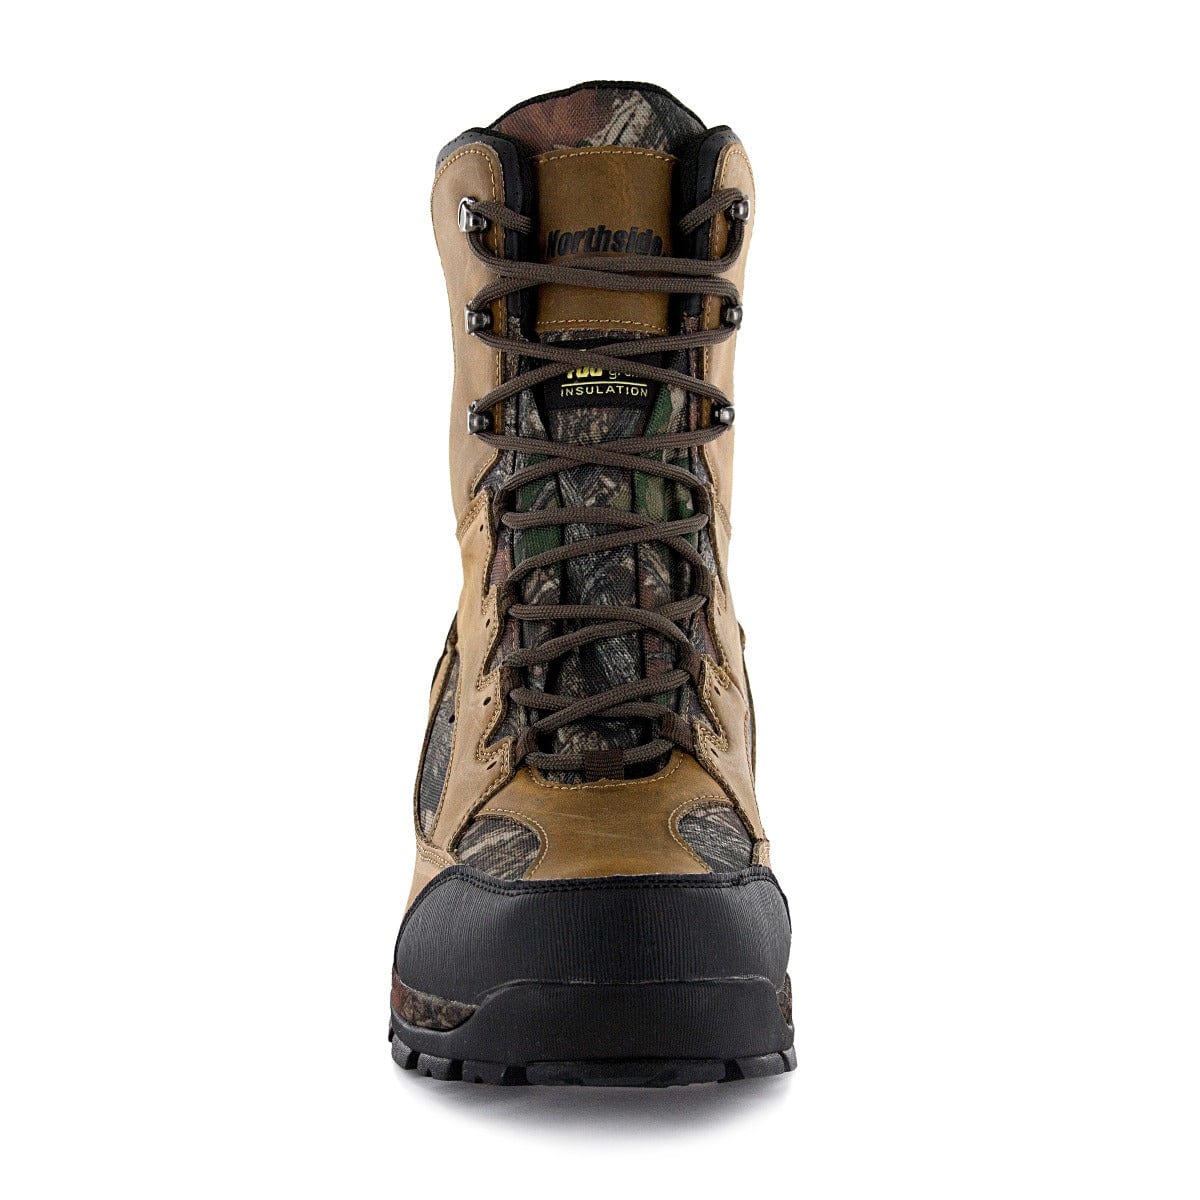 Mens Renegade 800 Insulated Waterproof Hunting Boot - Northside USA